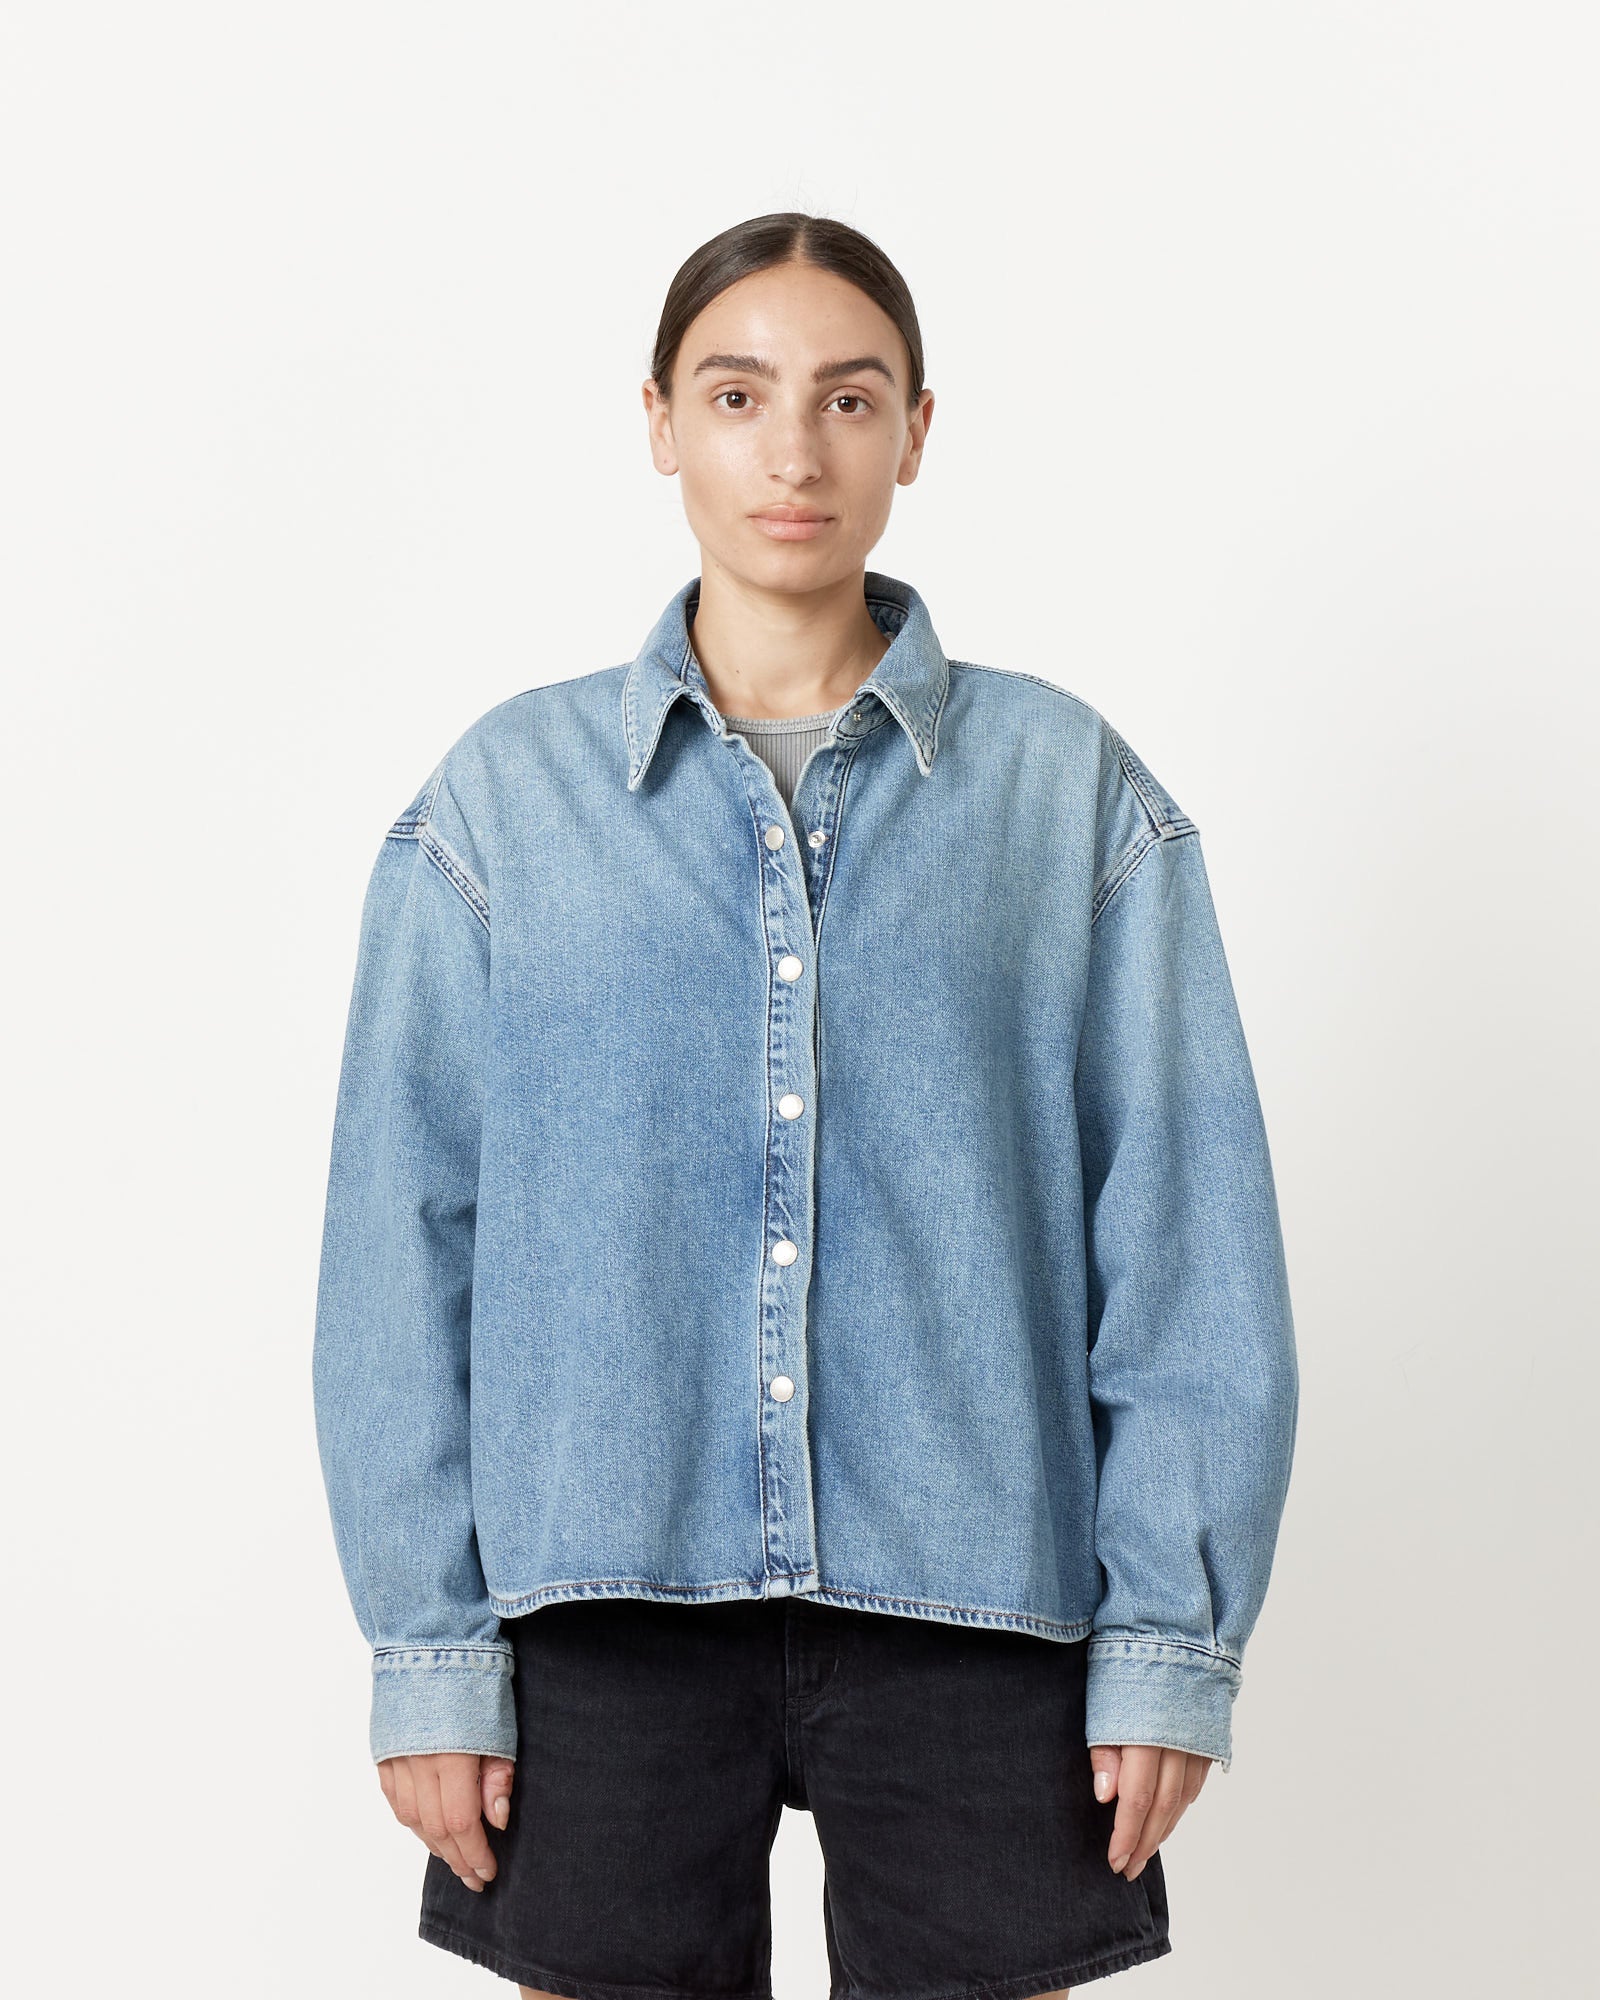 Aiden High Low Shirt in Shout